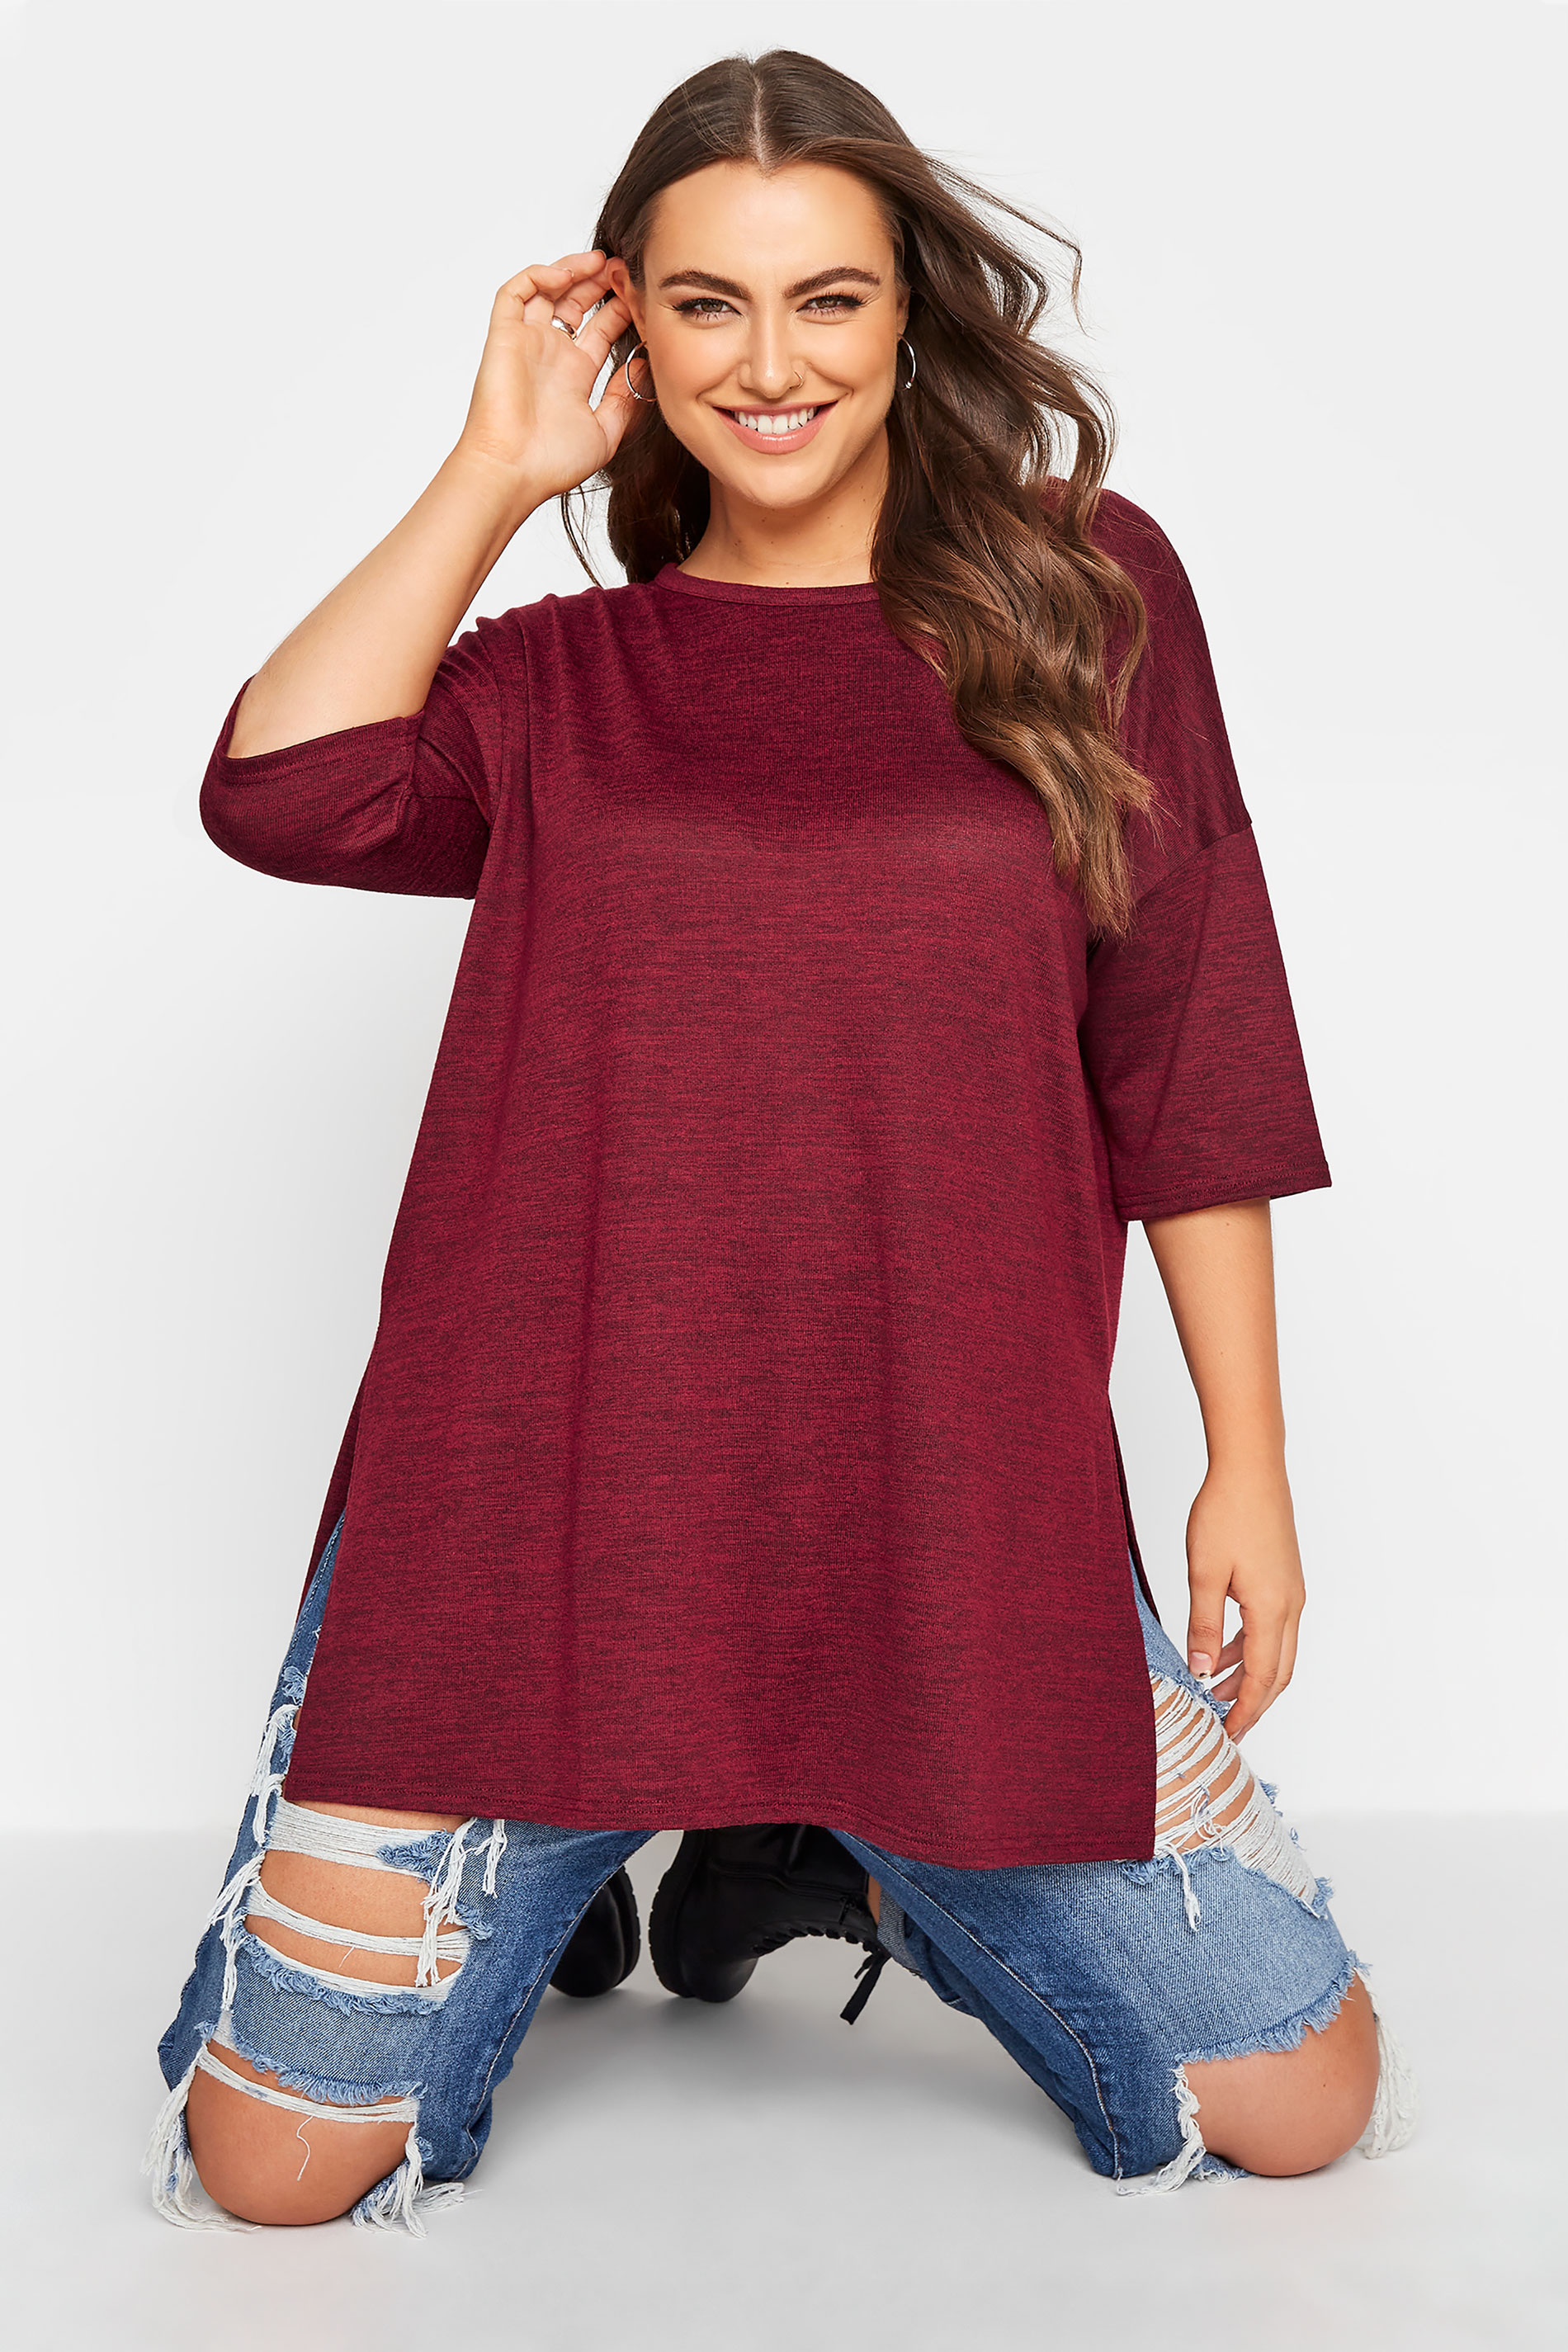 Berry Red Marl Oversized Jersey Tee_A.jpg